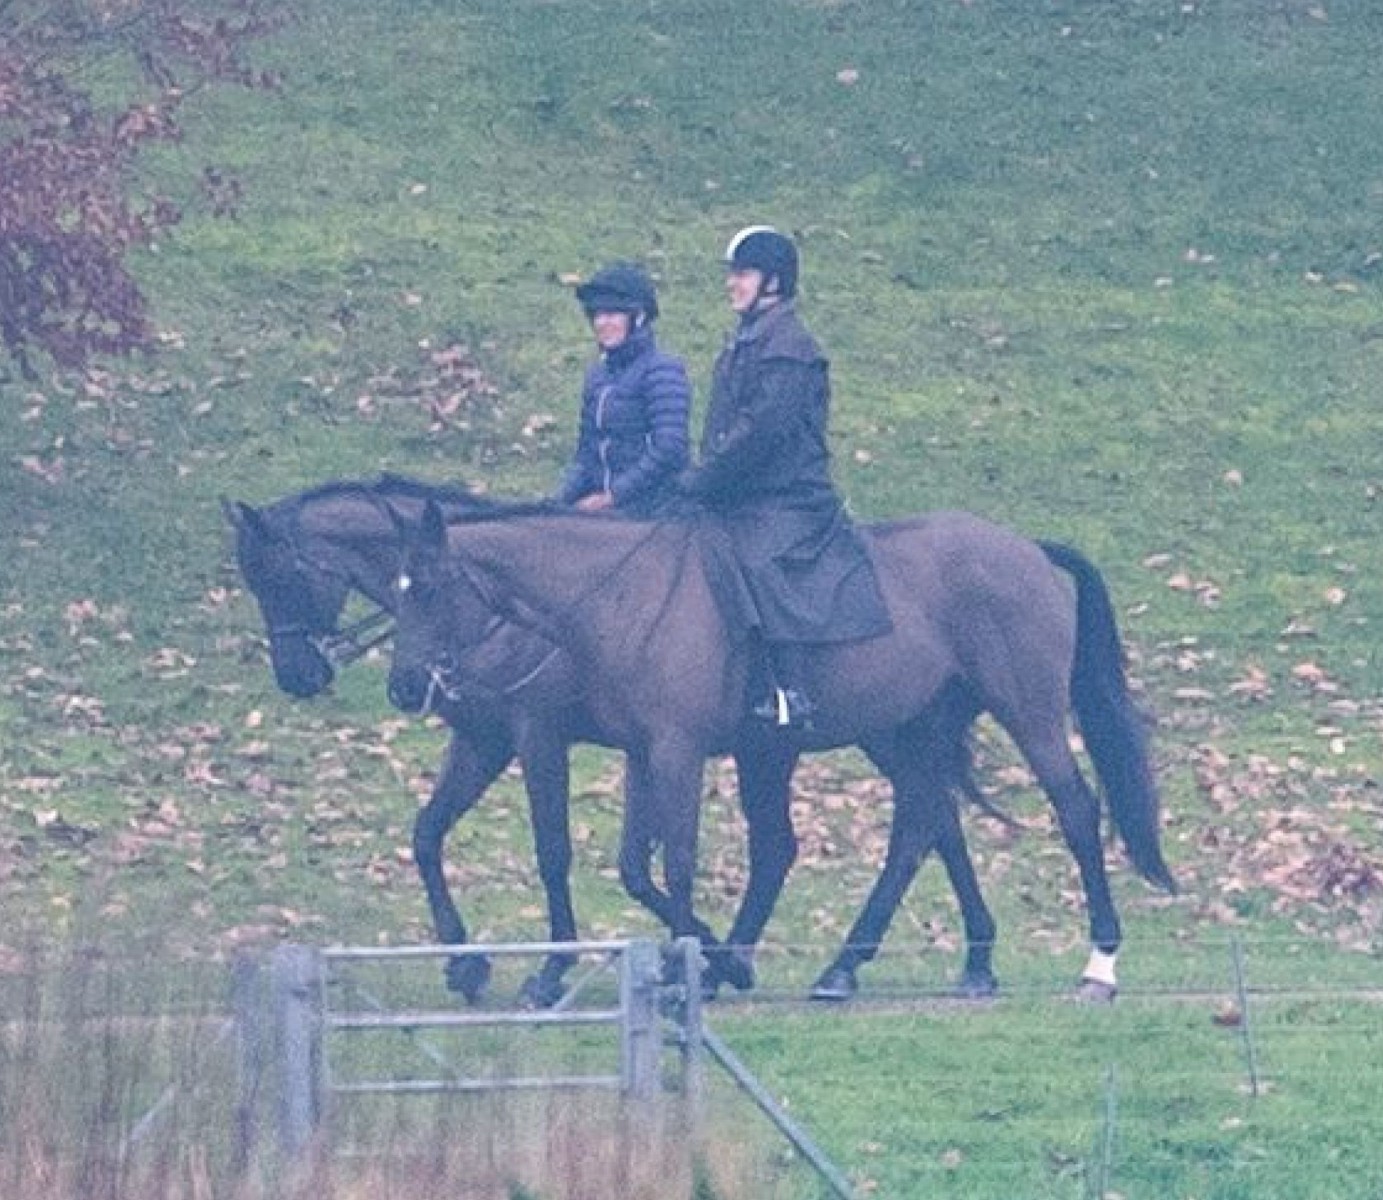 Prince Andrew riding a horse with a friend